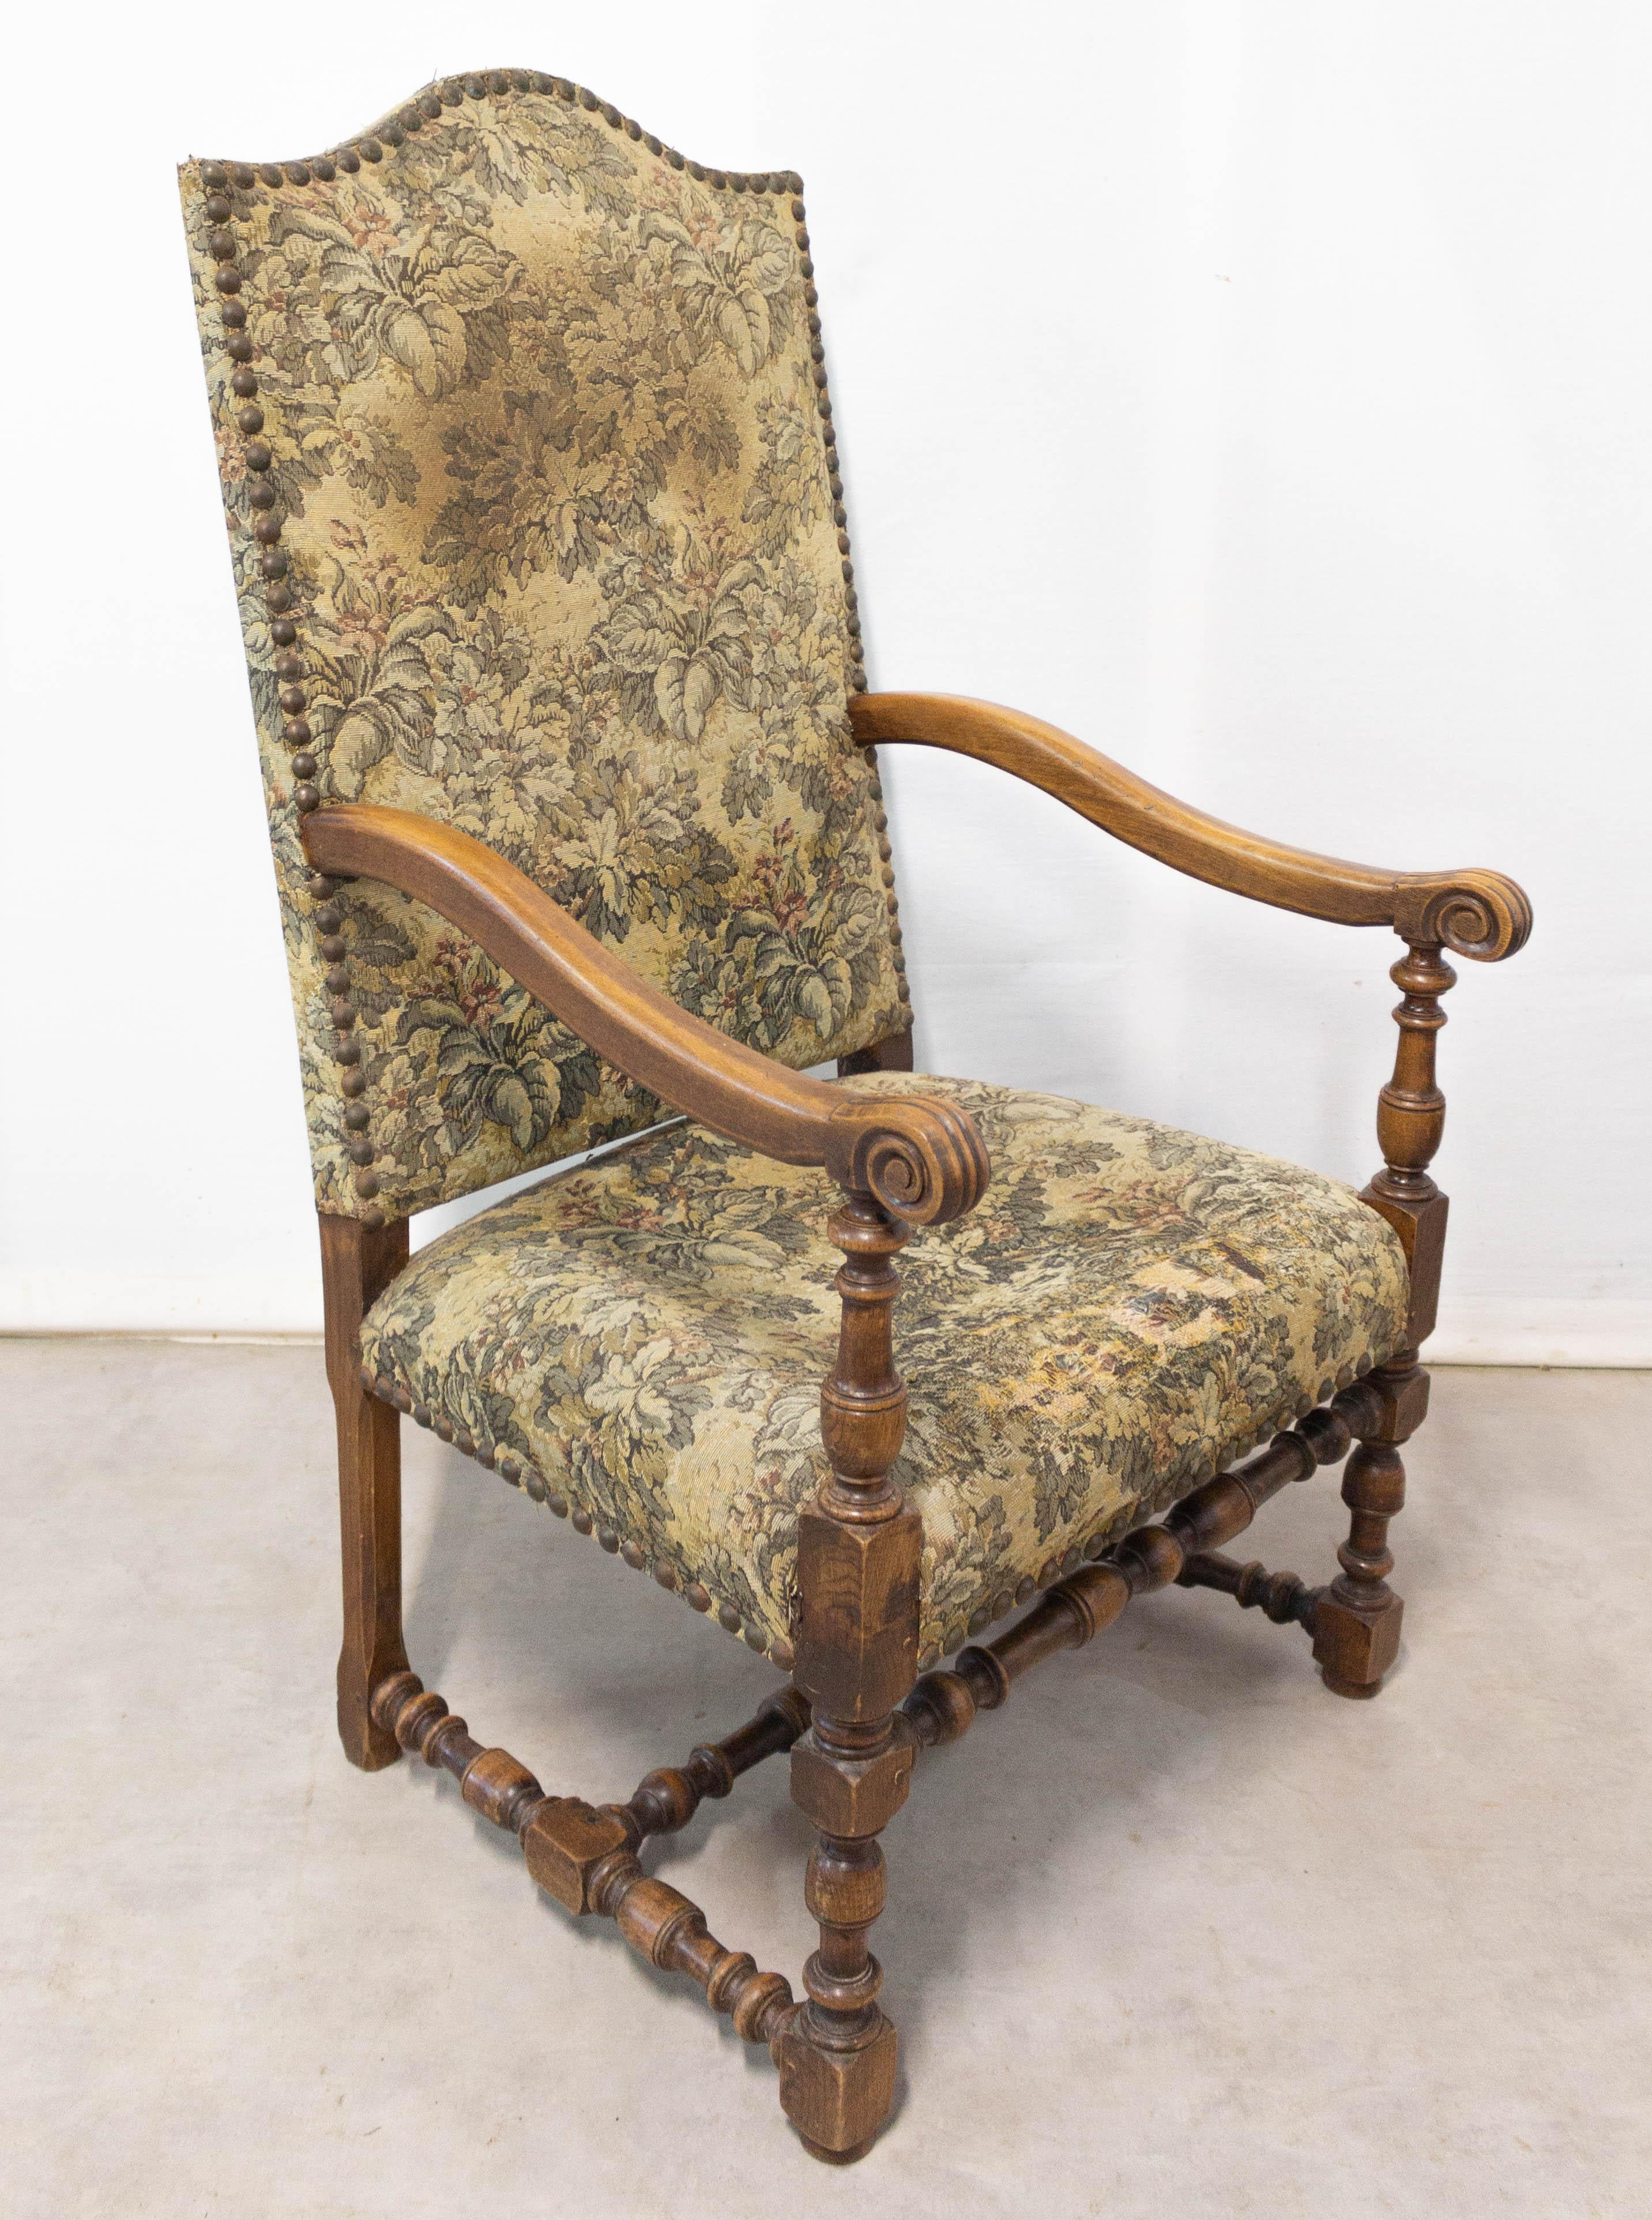 Elm Pair of Louis XIV Revival Armchairs French, Midcentury to Be Re-Upholstered